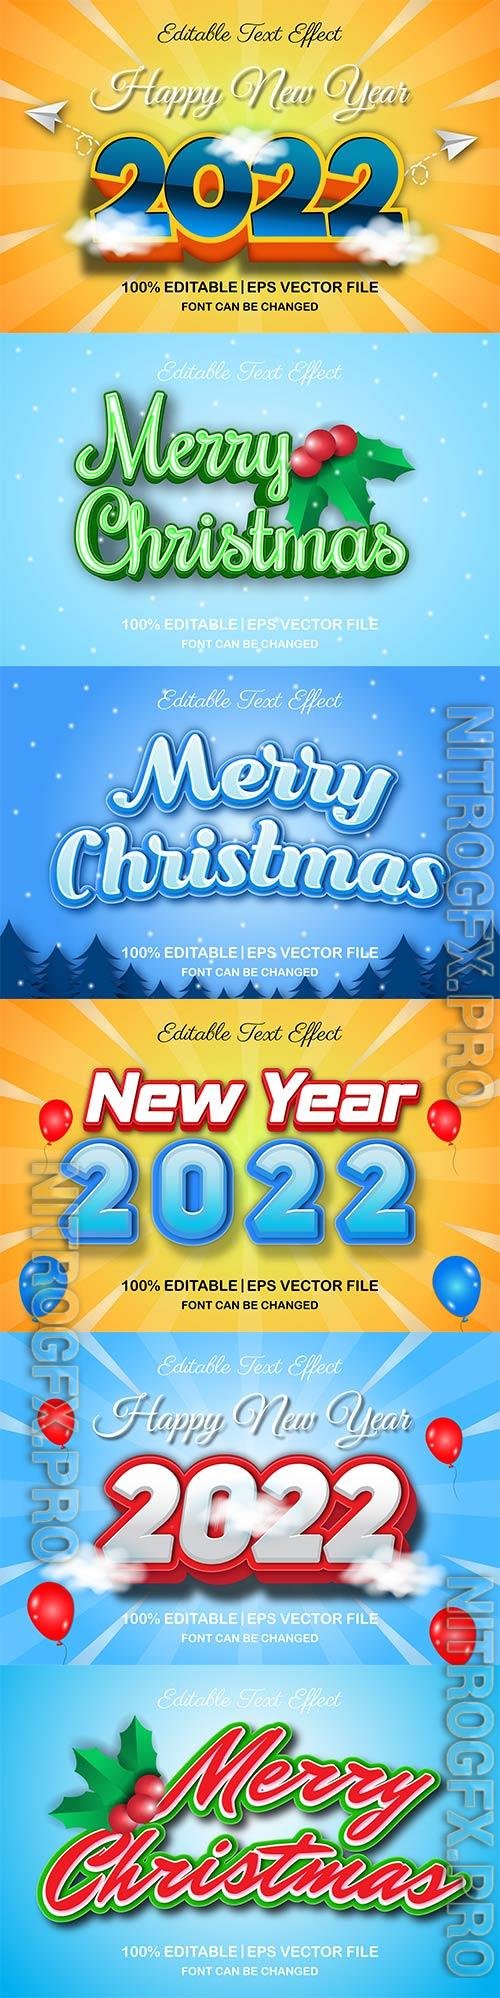 Merry christmas and happy new year 2022 editable vector text effects vol 9